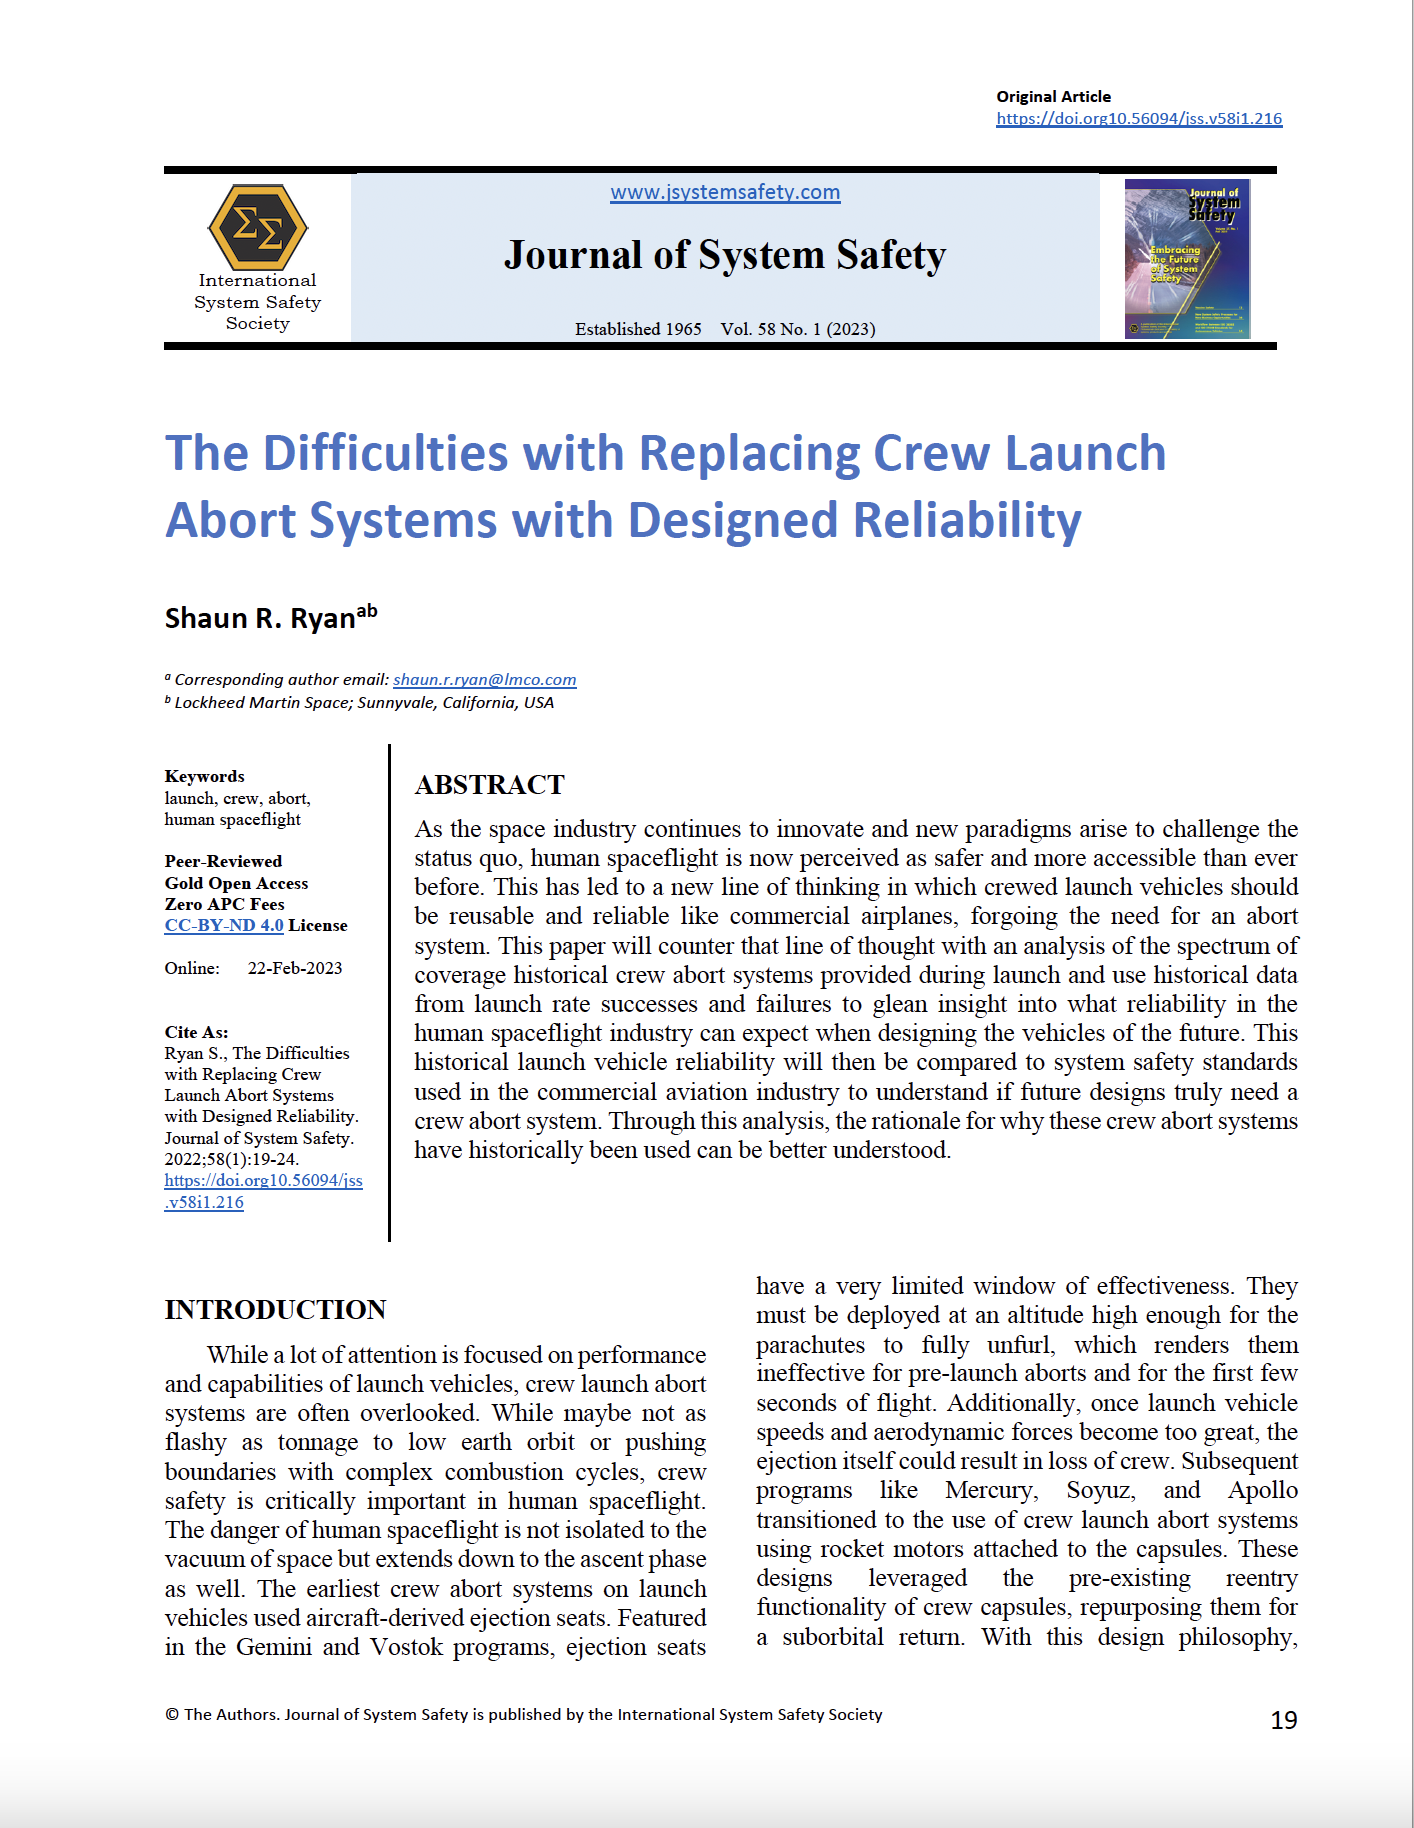 The Difficulties with Replacing Crew Launch Abort Systems with Designed Reliability